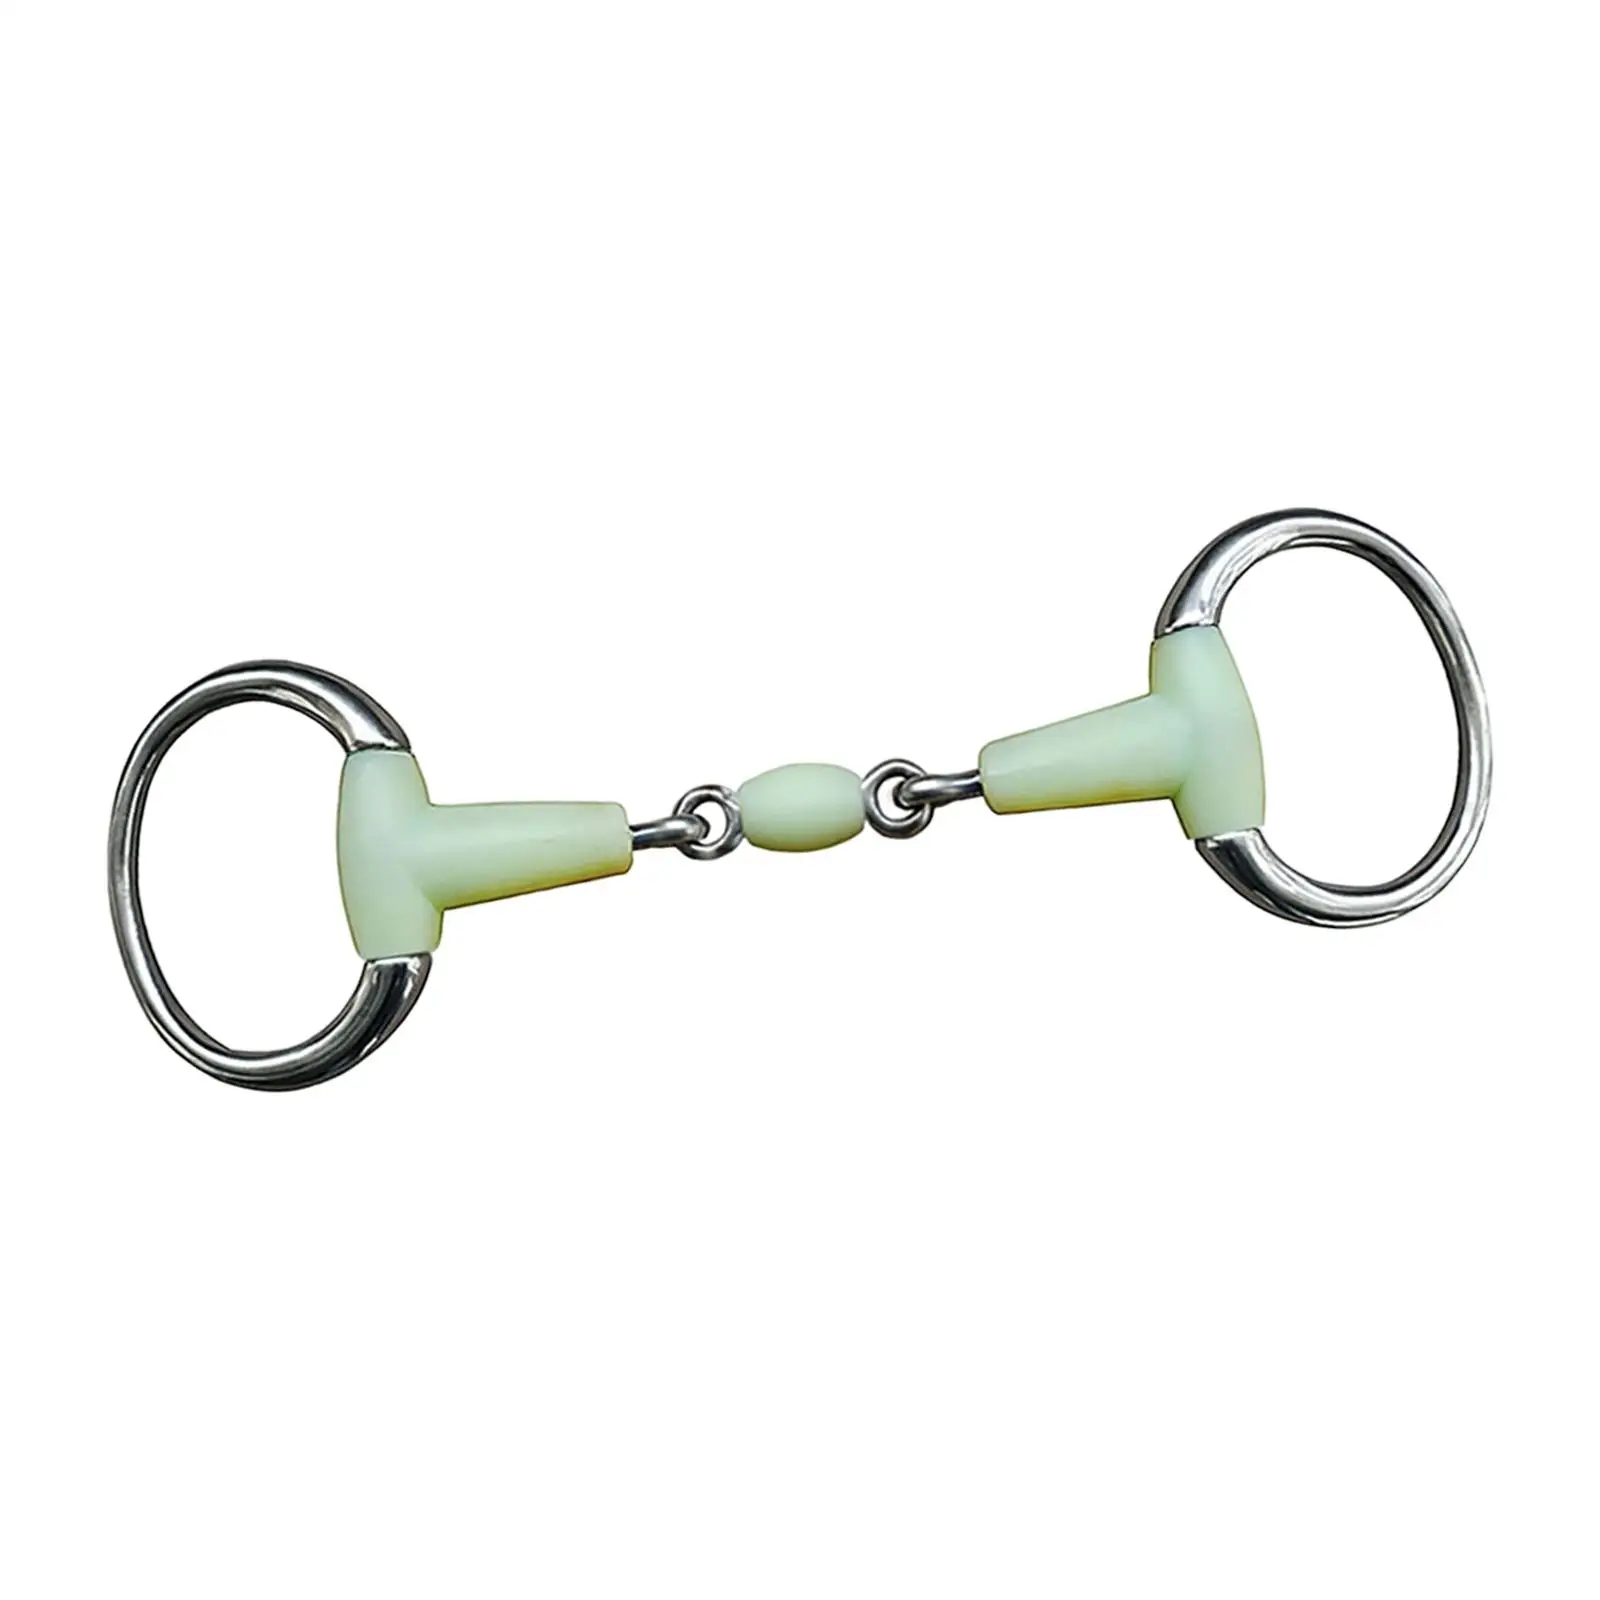 Durable Horse Ring Bit Horse Training Stainless Steel for Horse Riding Equipment Outdoor Sports Supplies